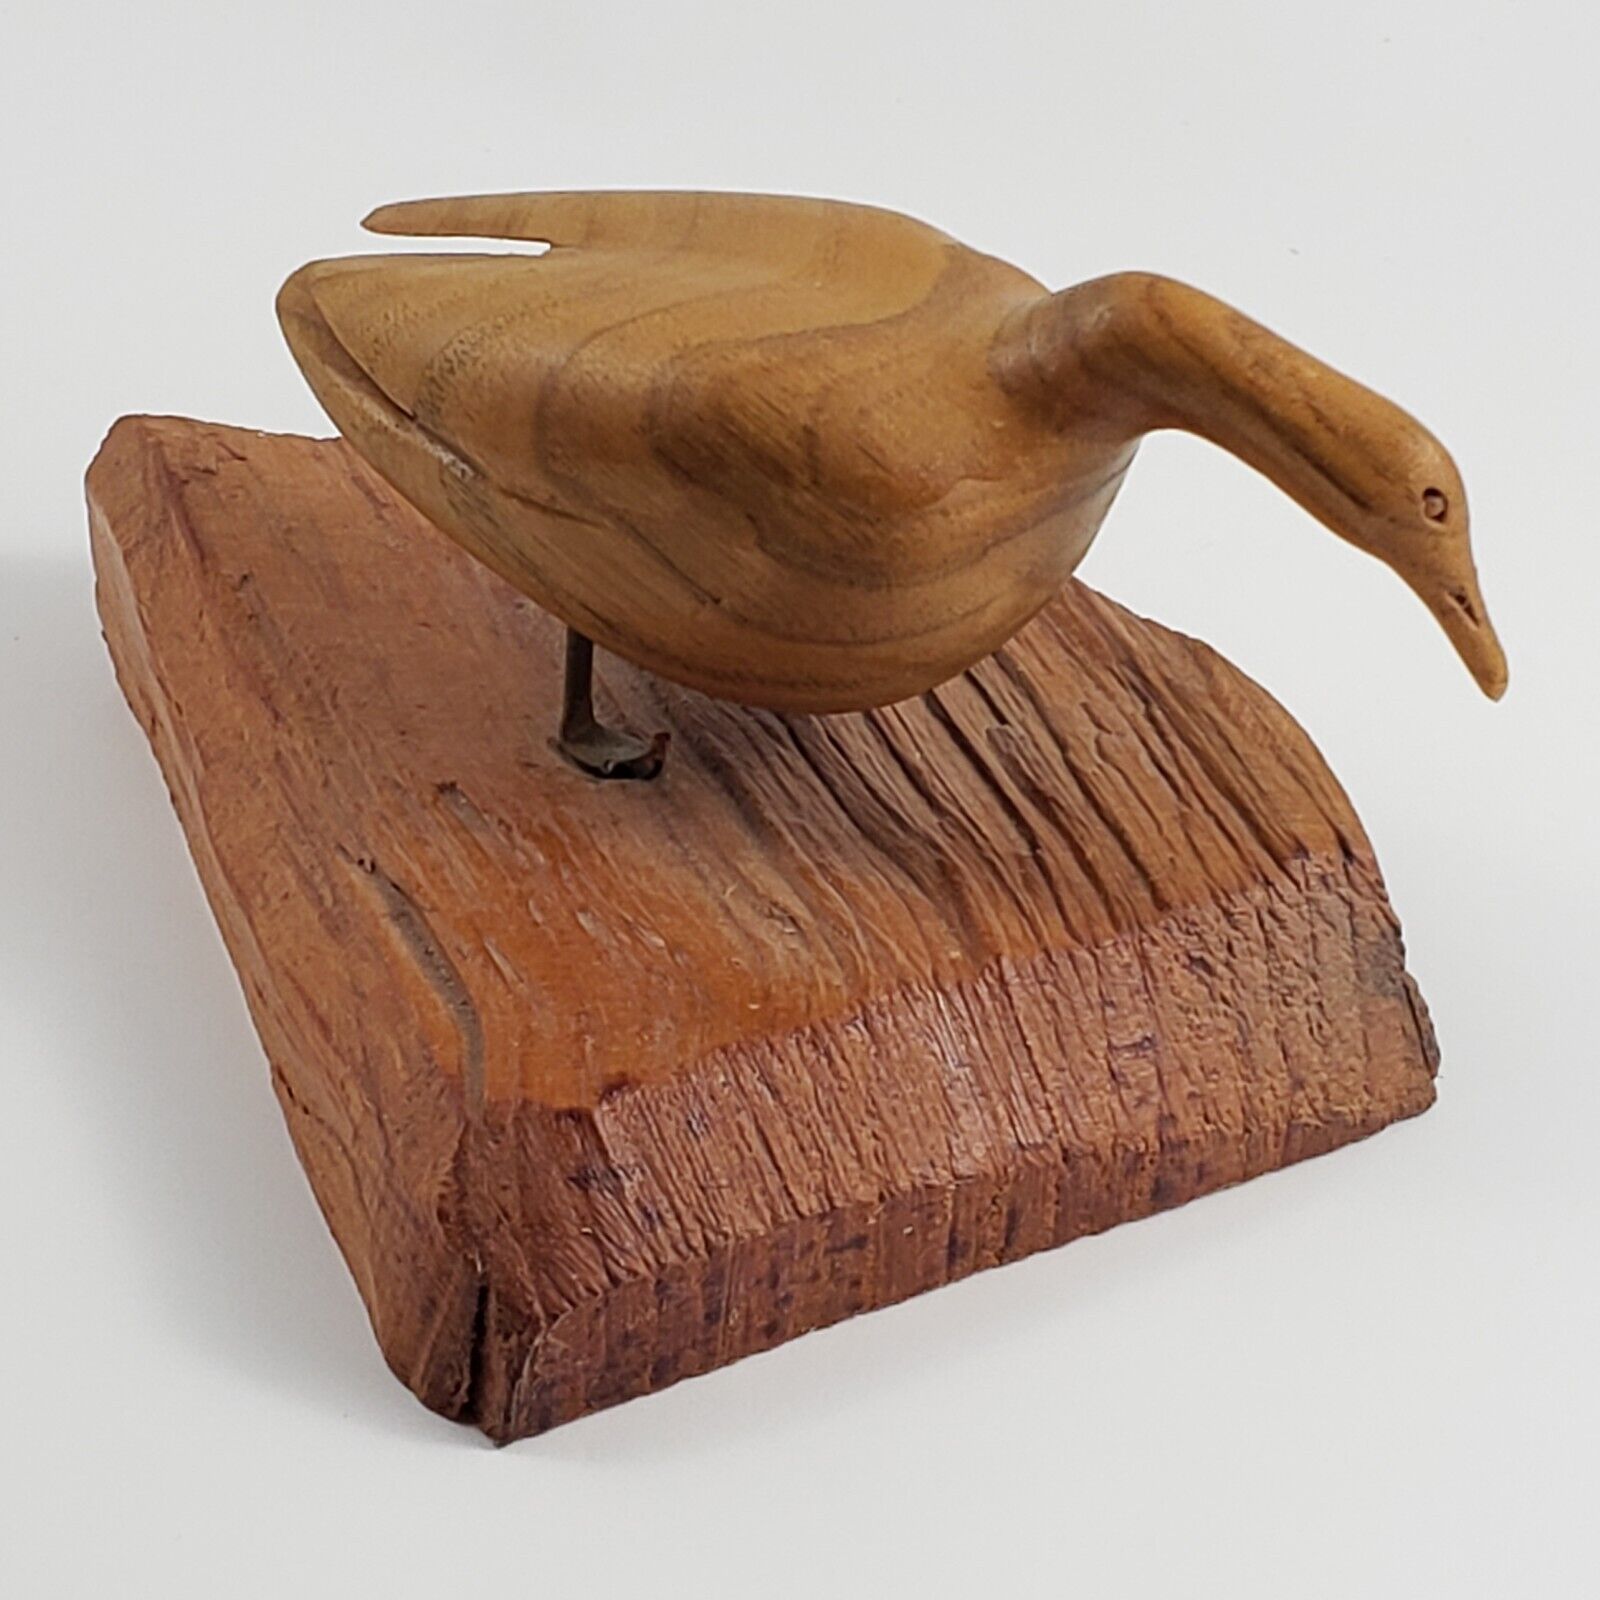 Vintage Hand Carved Wooden Duck Figurine Drift Wood On Stand Signature of Carver